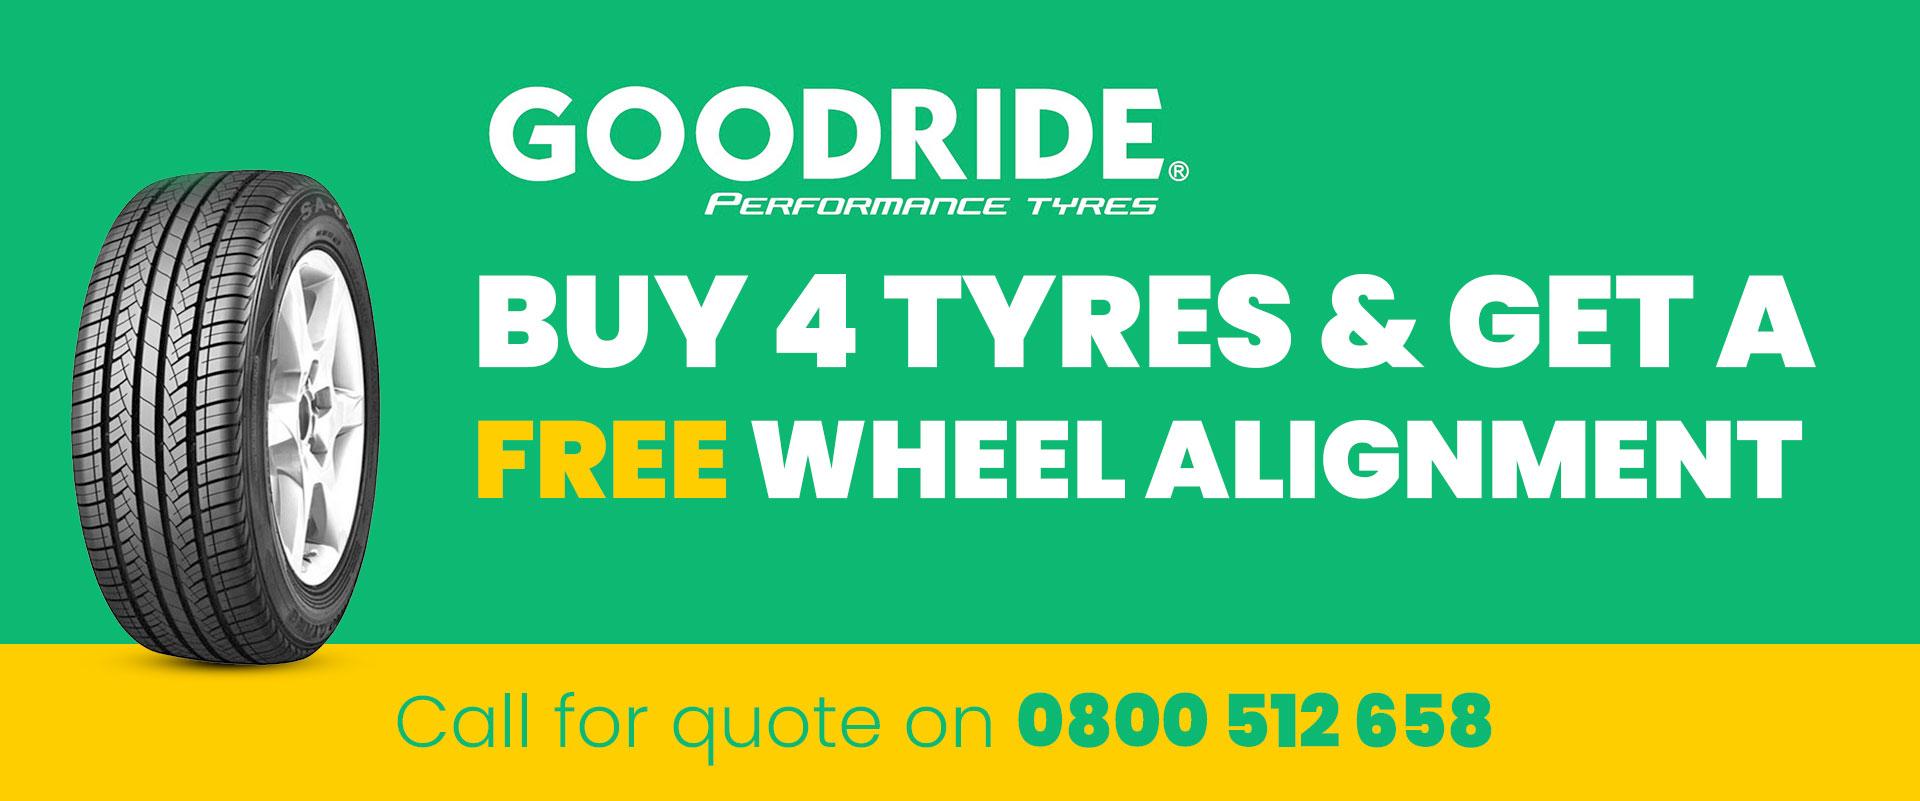 good ride tyres offer